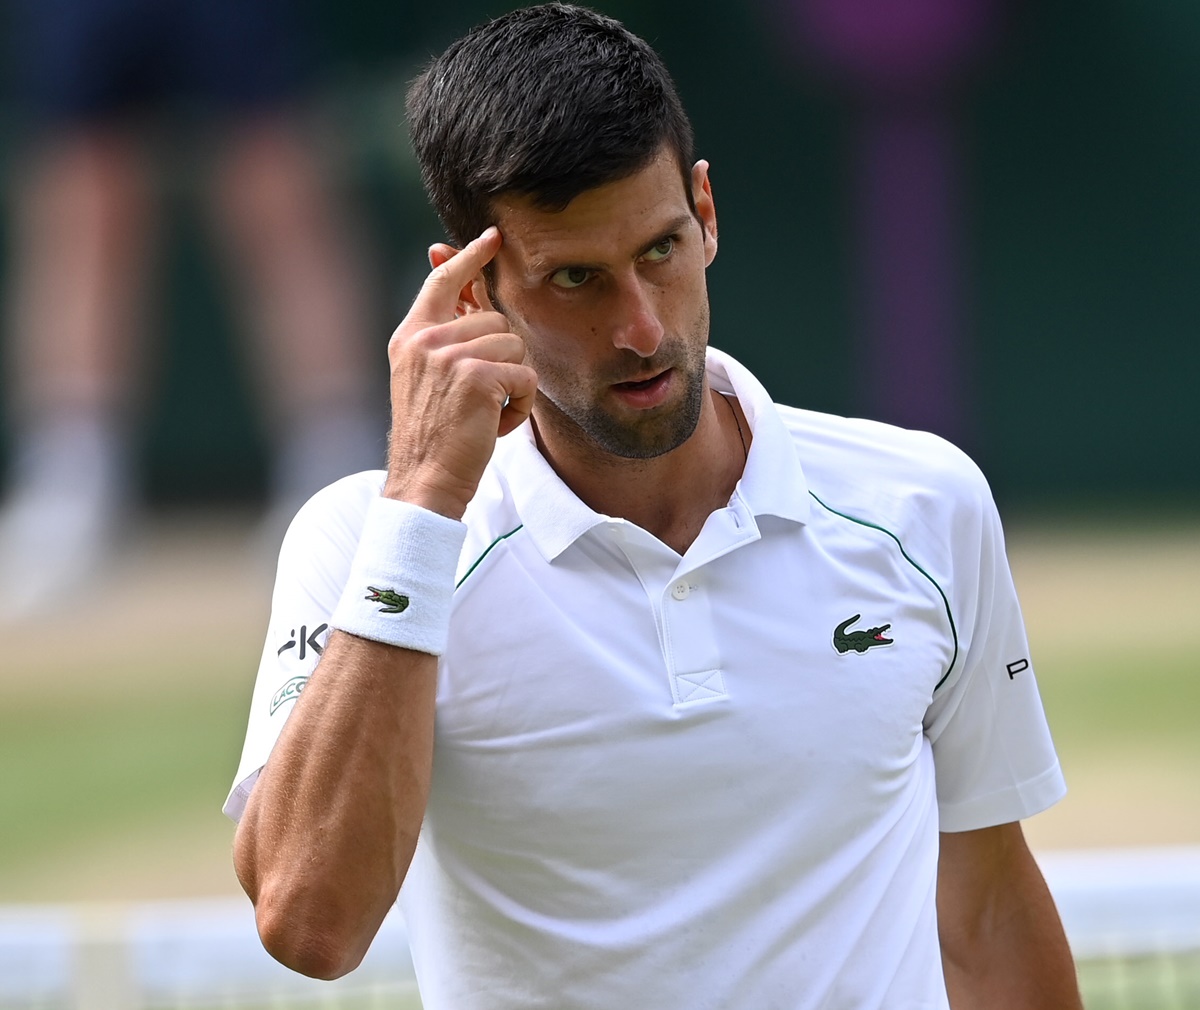 Djokovic confirms he will compete at Tokyo Games